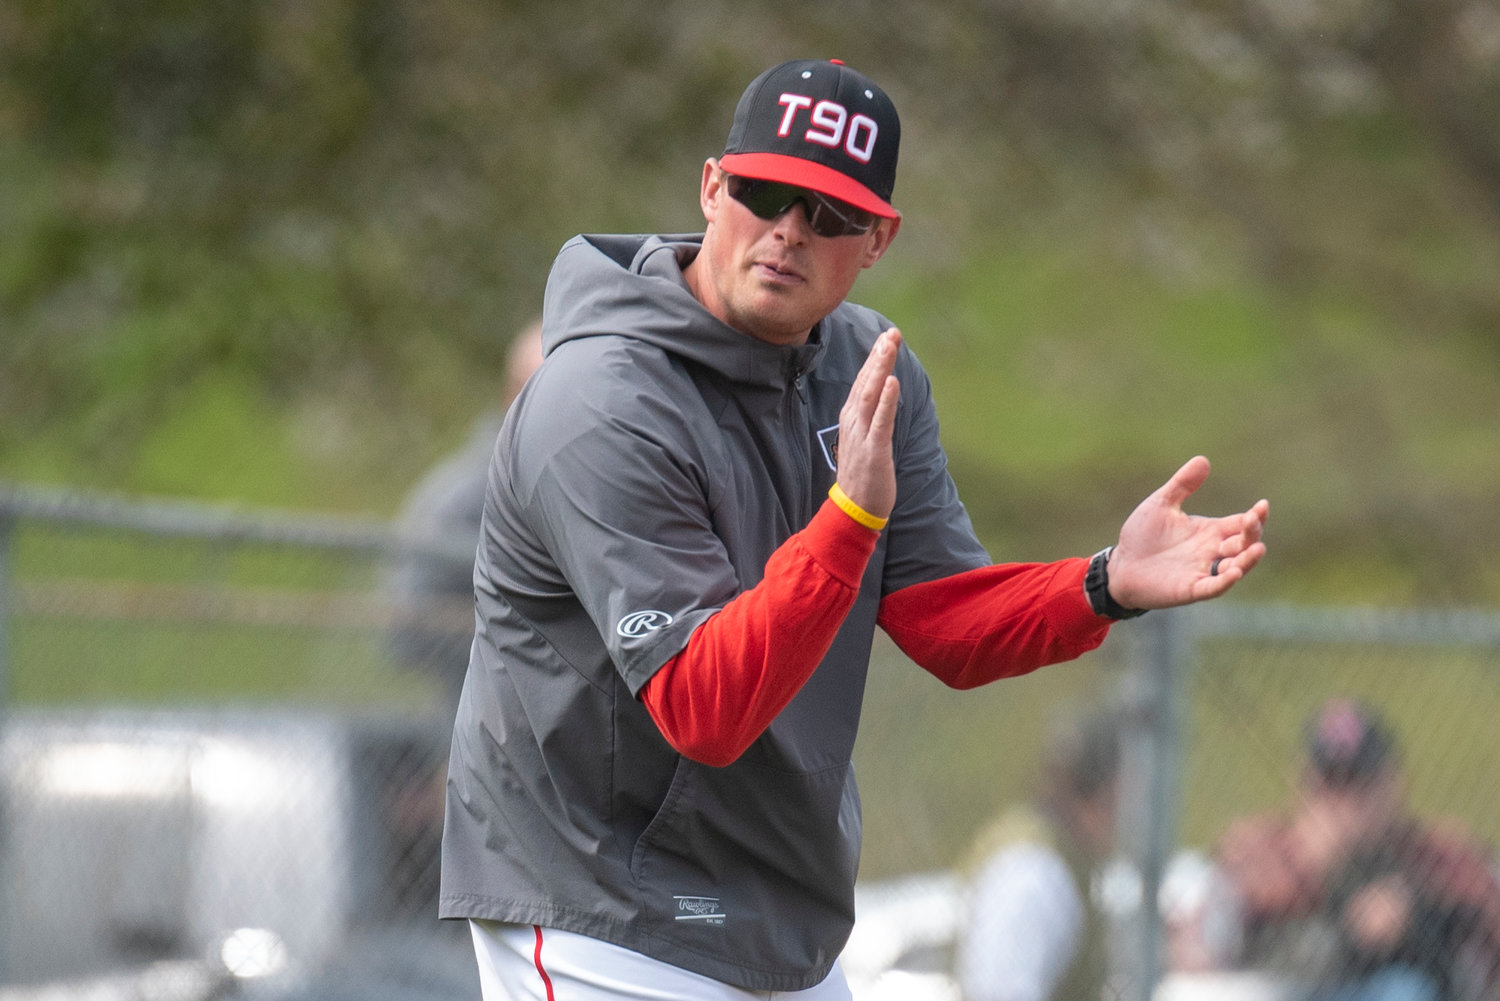 Tenino baseball coach Ryan Schlesser encourages a Beaver batter during a home game against Elma on April 29.